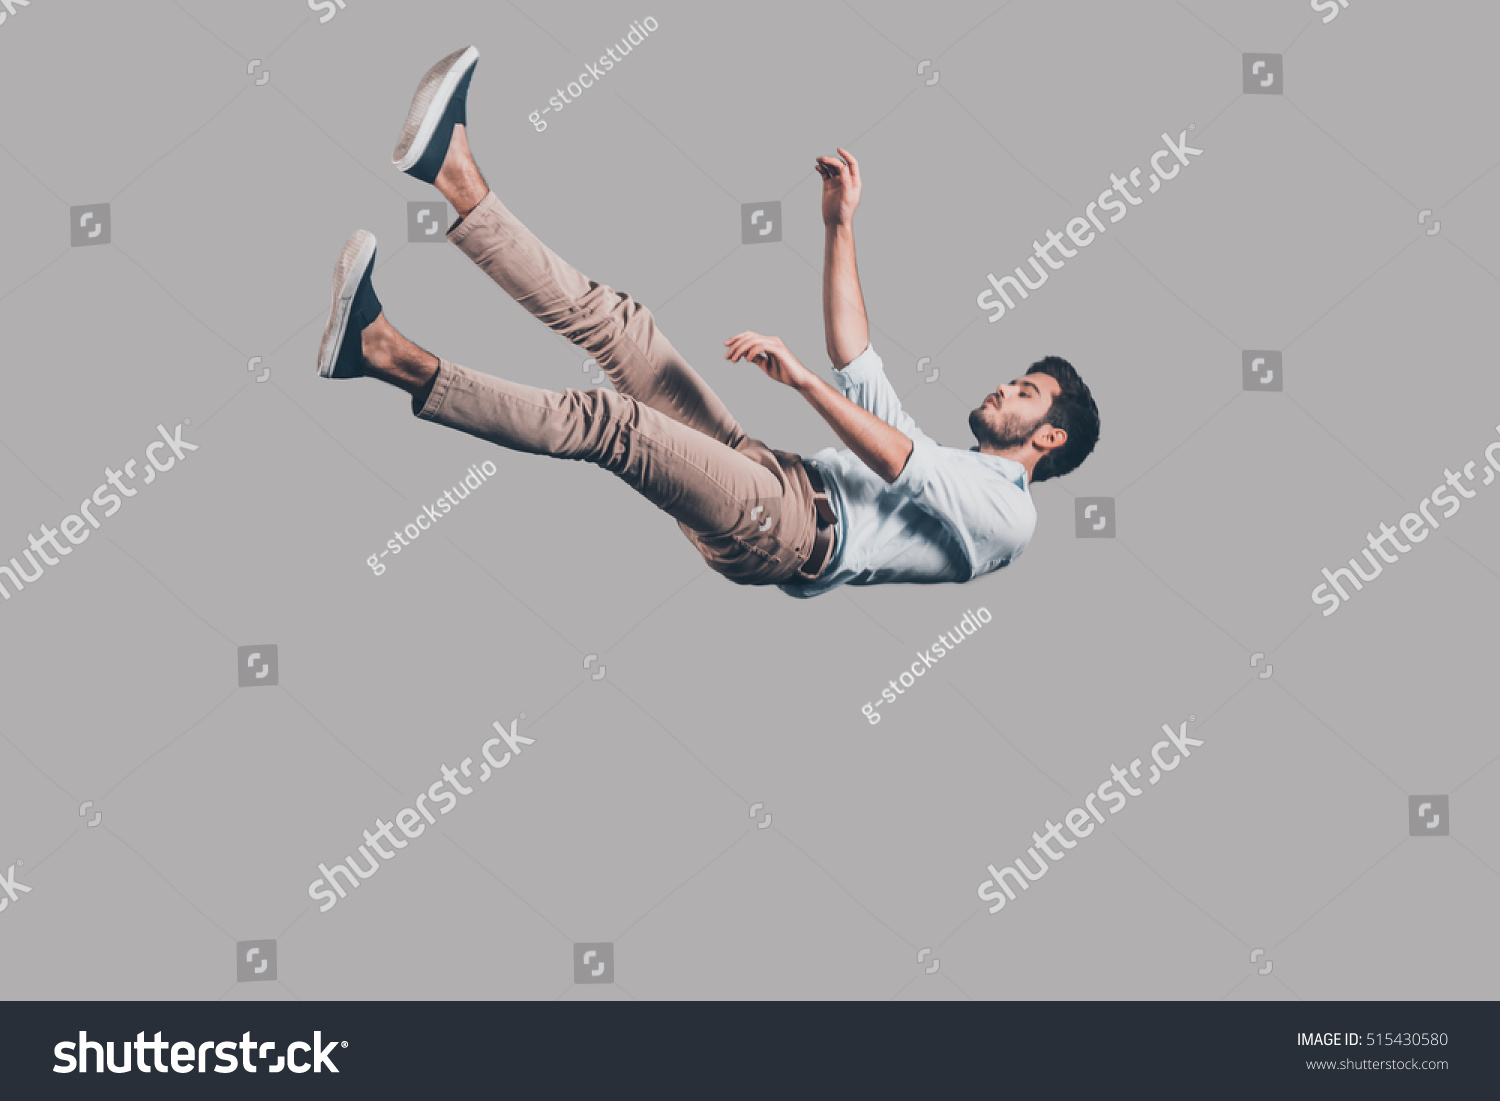 Man falling down. Mid-air shot of handsome young man falling against grey background  #515430580